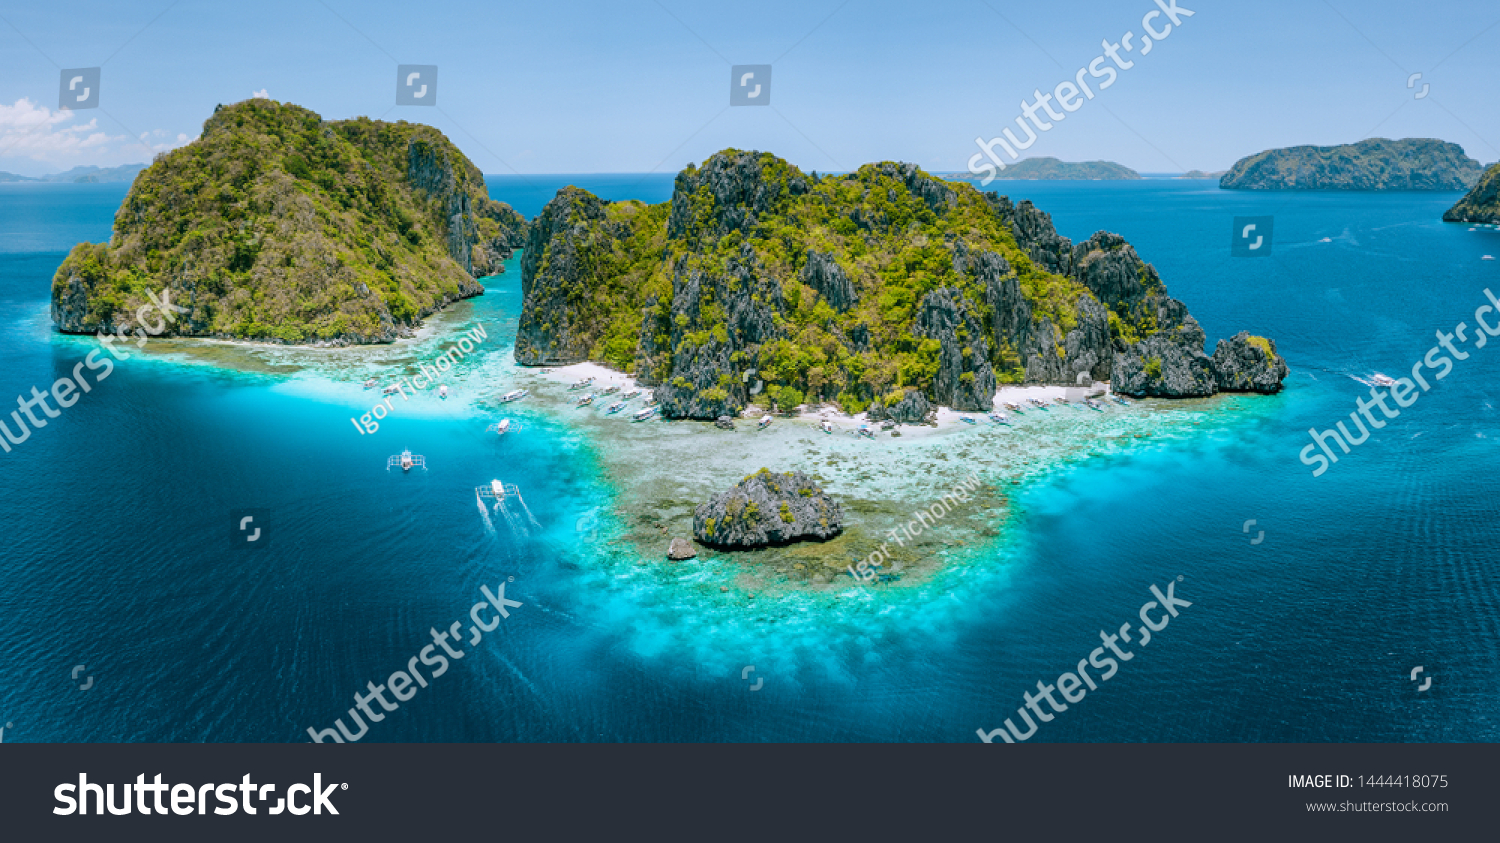 Aerial drone view of tropical Shimizu Island steep rocks and white sand beach in blue water El Nido, Palawan, Philippines. Tourist attraction most beautiful famous nature spot Marine Reserve Park #1444418075